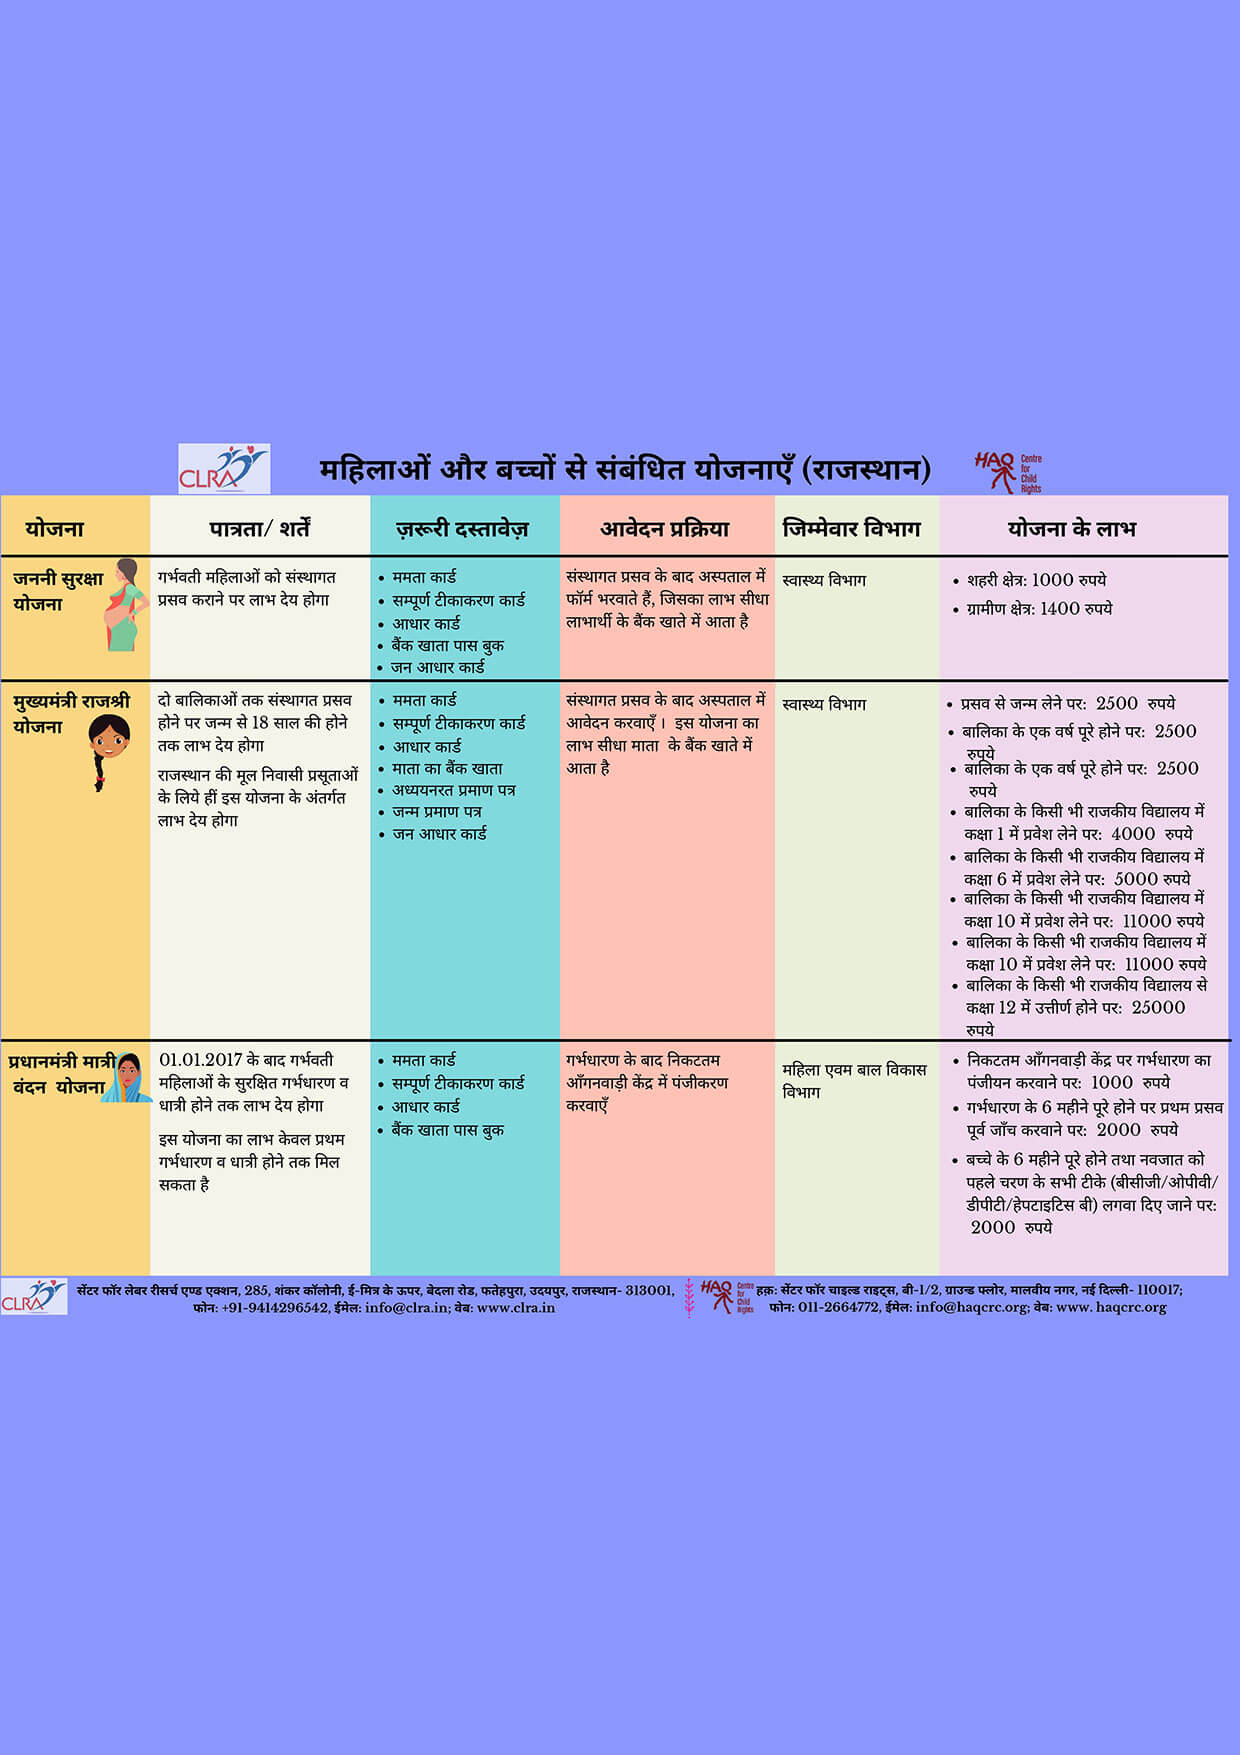 Schemes Related to Women and Children (Rajasthan)